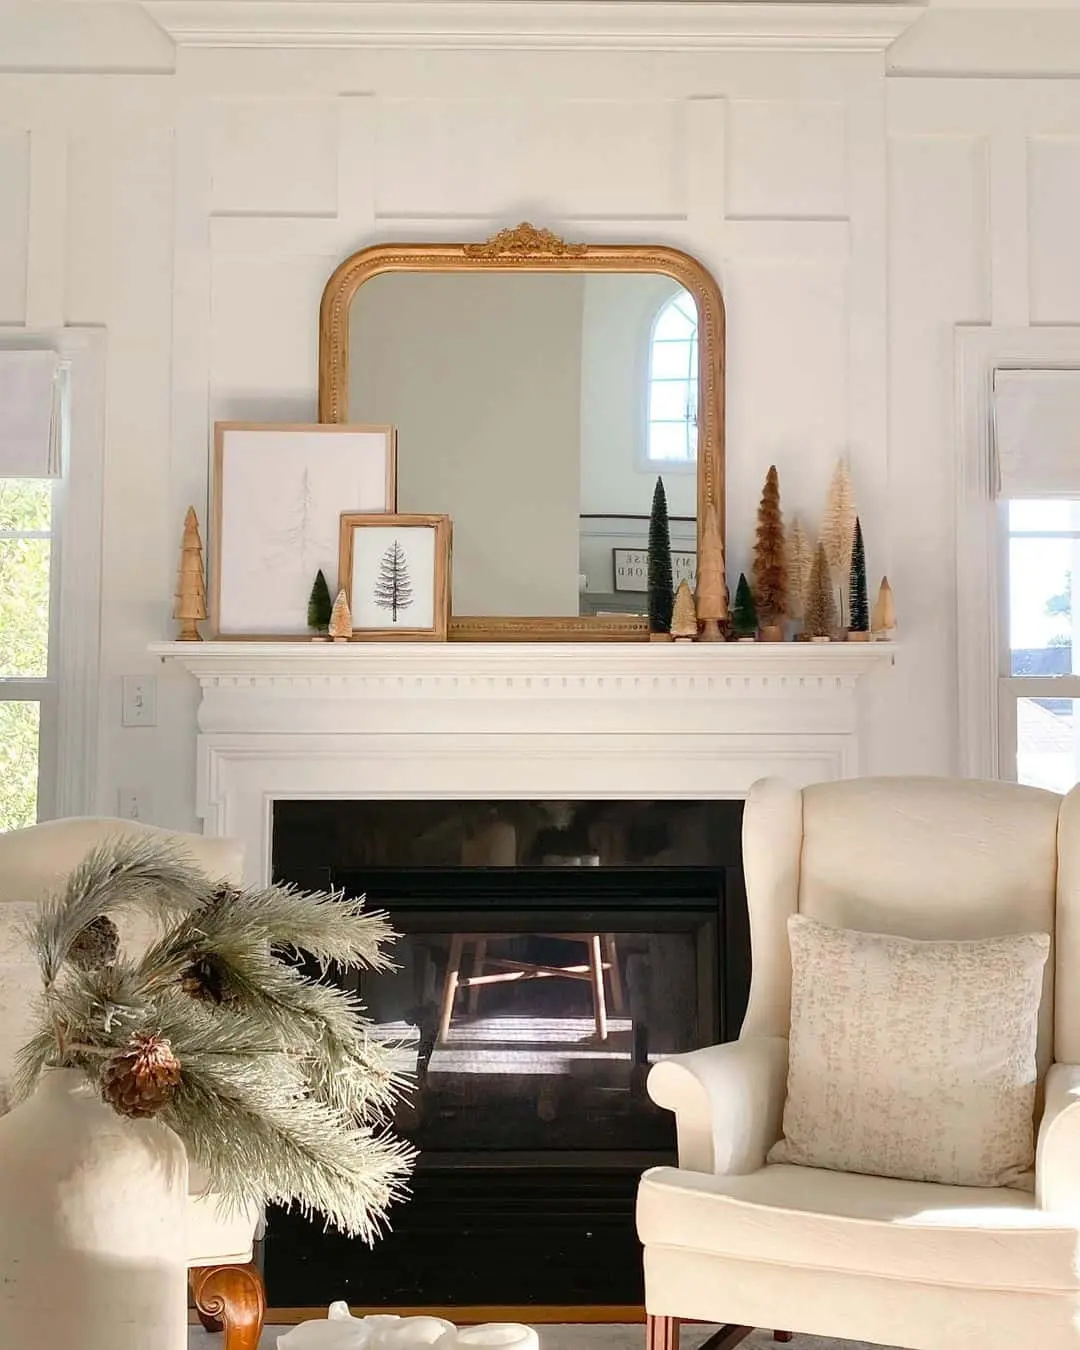 Mirror above fireplace ideas; Step into a world of whimsy and romance with this delightful vignette. The floral painting, playfully layered in front of the stately vintage mirror, creates a captivating display that transports you to a dreamy garden. The intricate brass framing of both pieces not only adds a touch of sophistication but also creates a sense of unity and regality. It's as if the mirror and painting were destined to be together. To amp up the charm even more, brass candlesticks and fall florals are thoughtfully arranged around the vignette, adding a festive and warm touch.